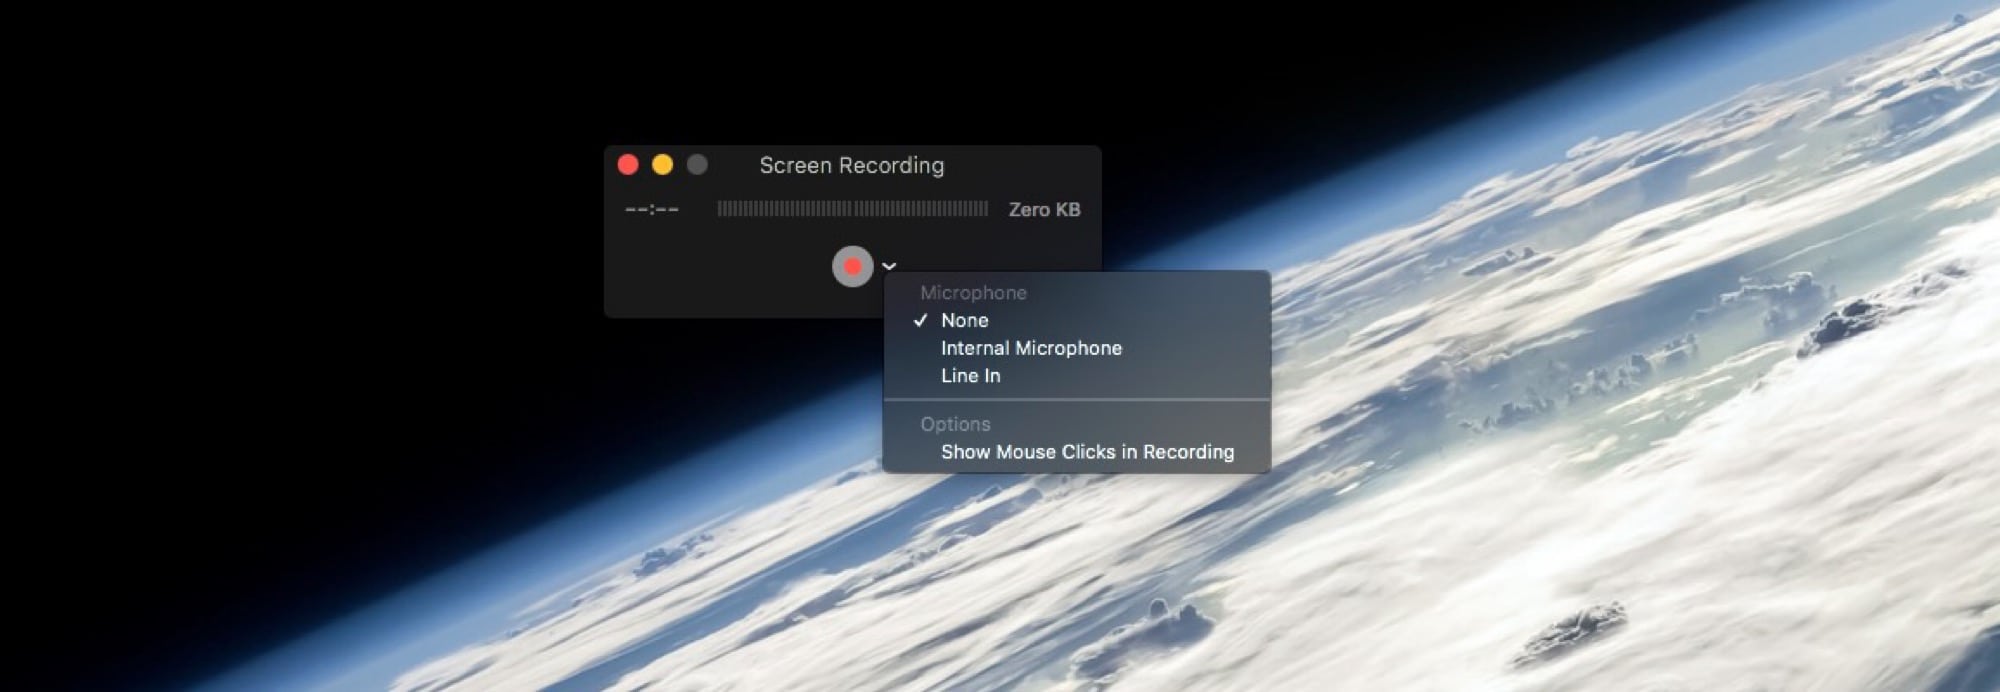 When making a Mac screen recording, just click the arrow for more options.